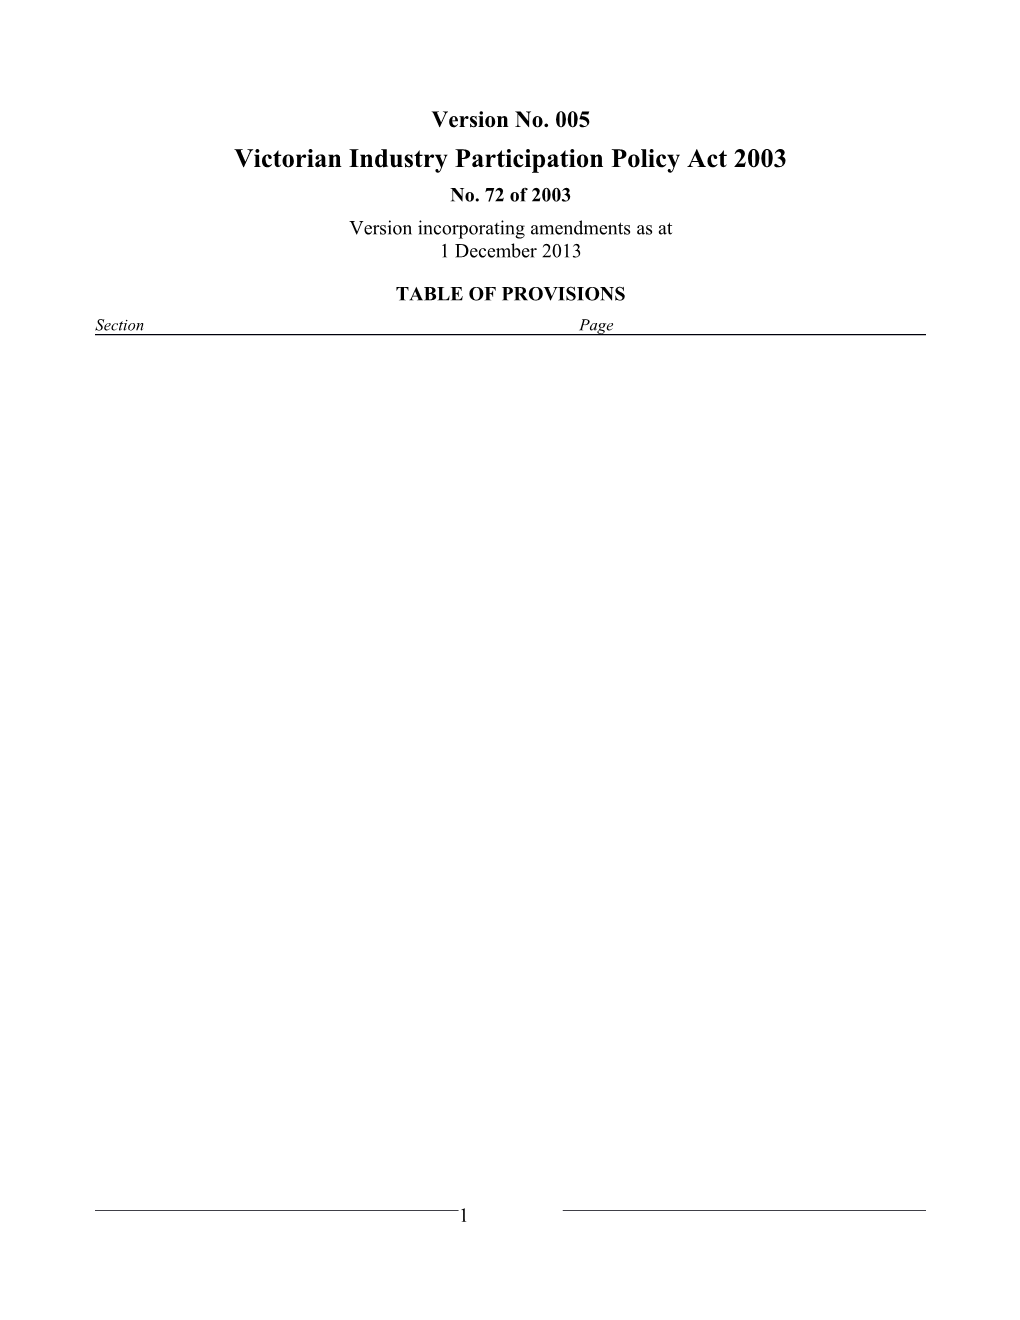 Victorian Industry Participation Policy Act 2003